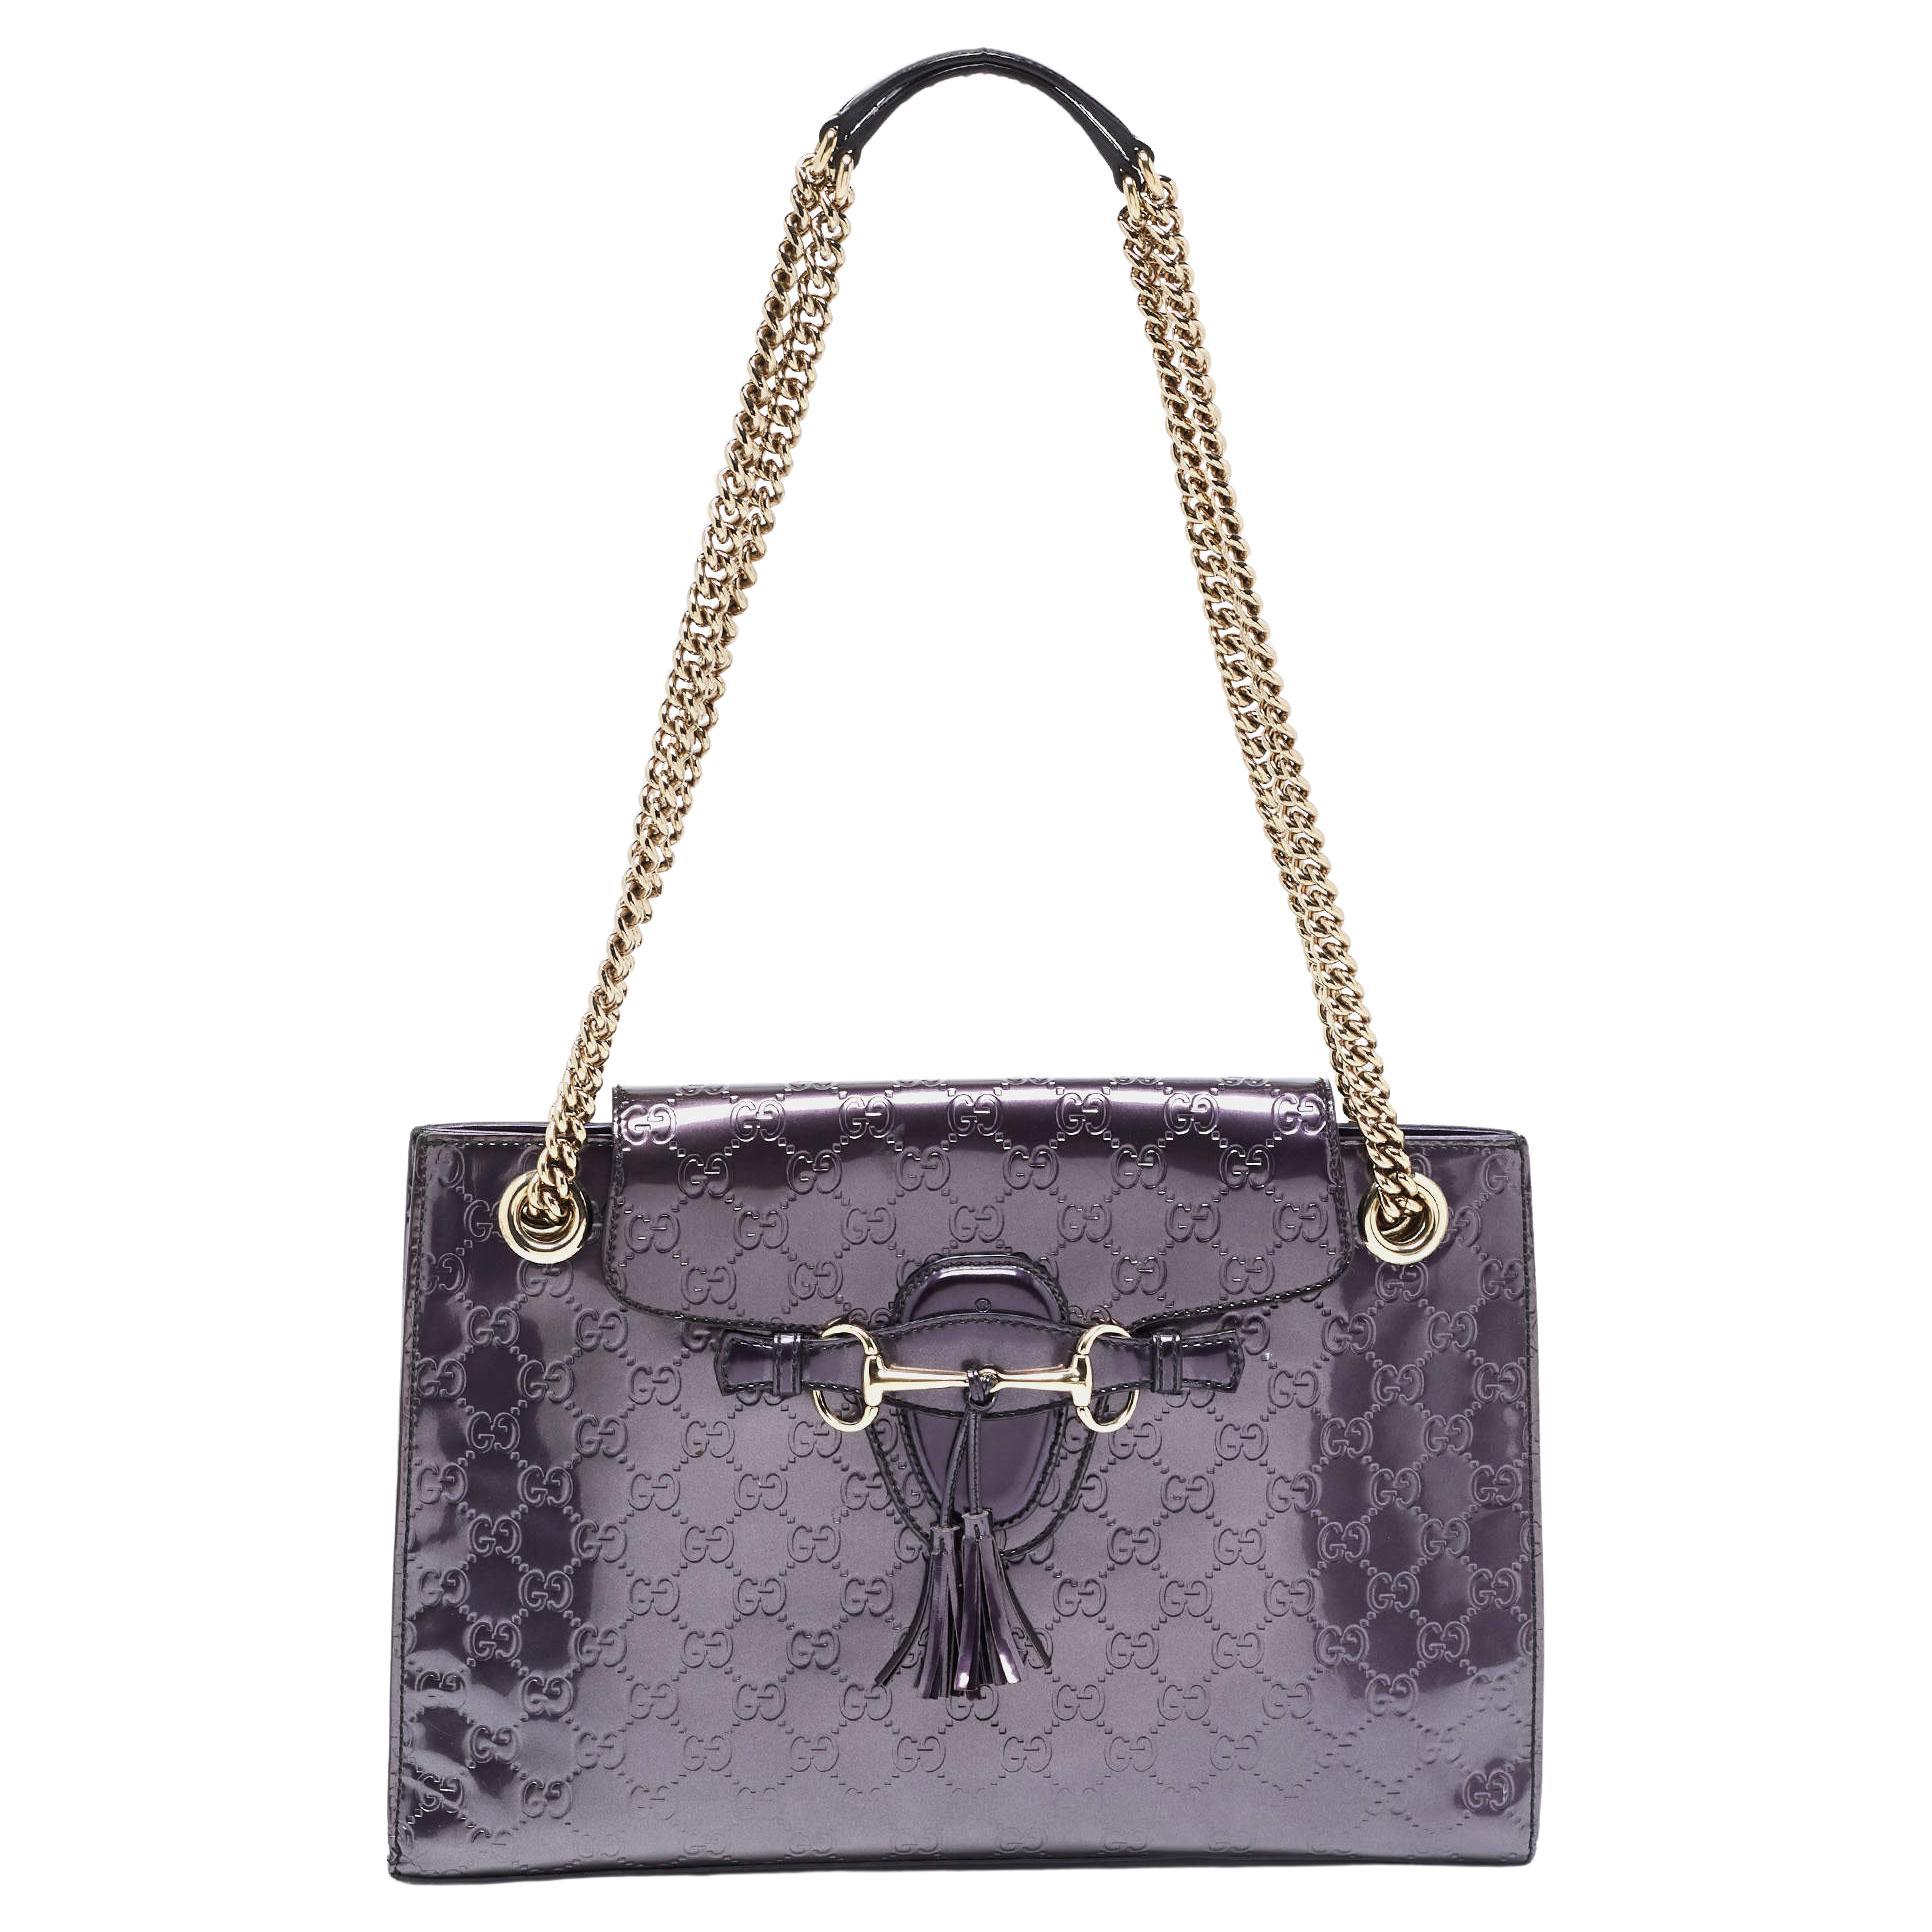 CHANEL Lilac Pastel Quilted Flap Handbag, Silver Chain, 2000-2002